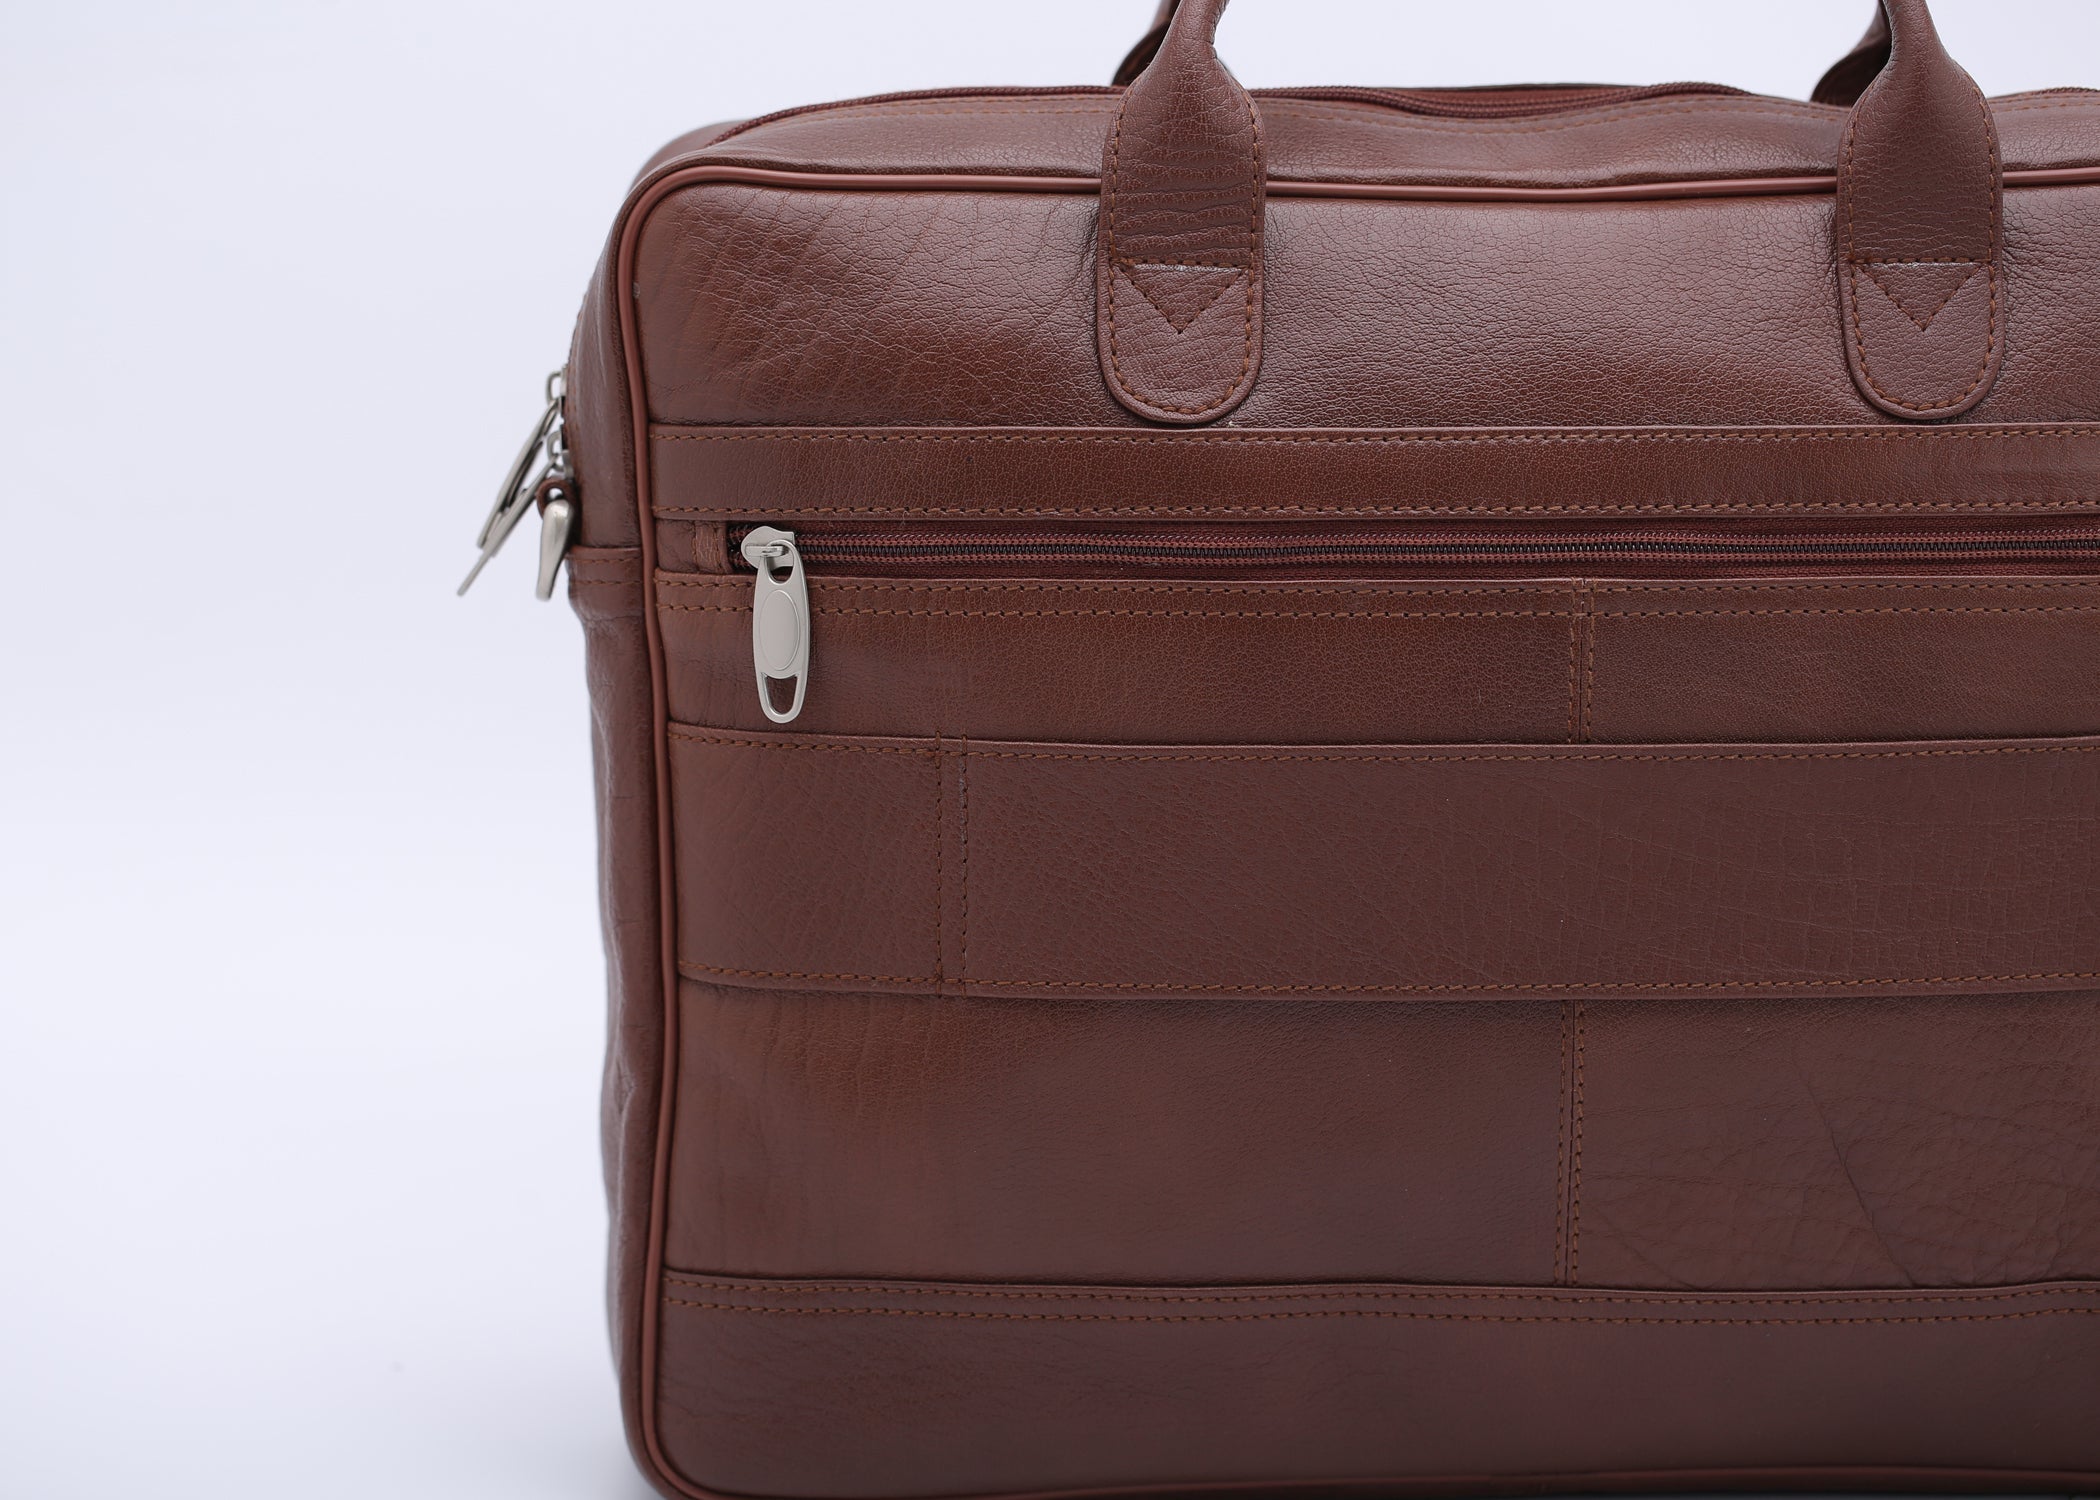 The Ultimate Tan Leather Briefcase Bag